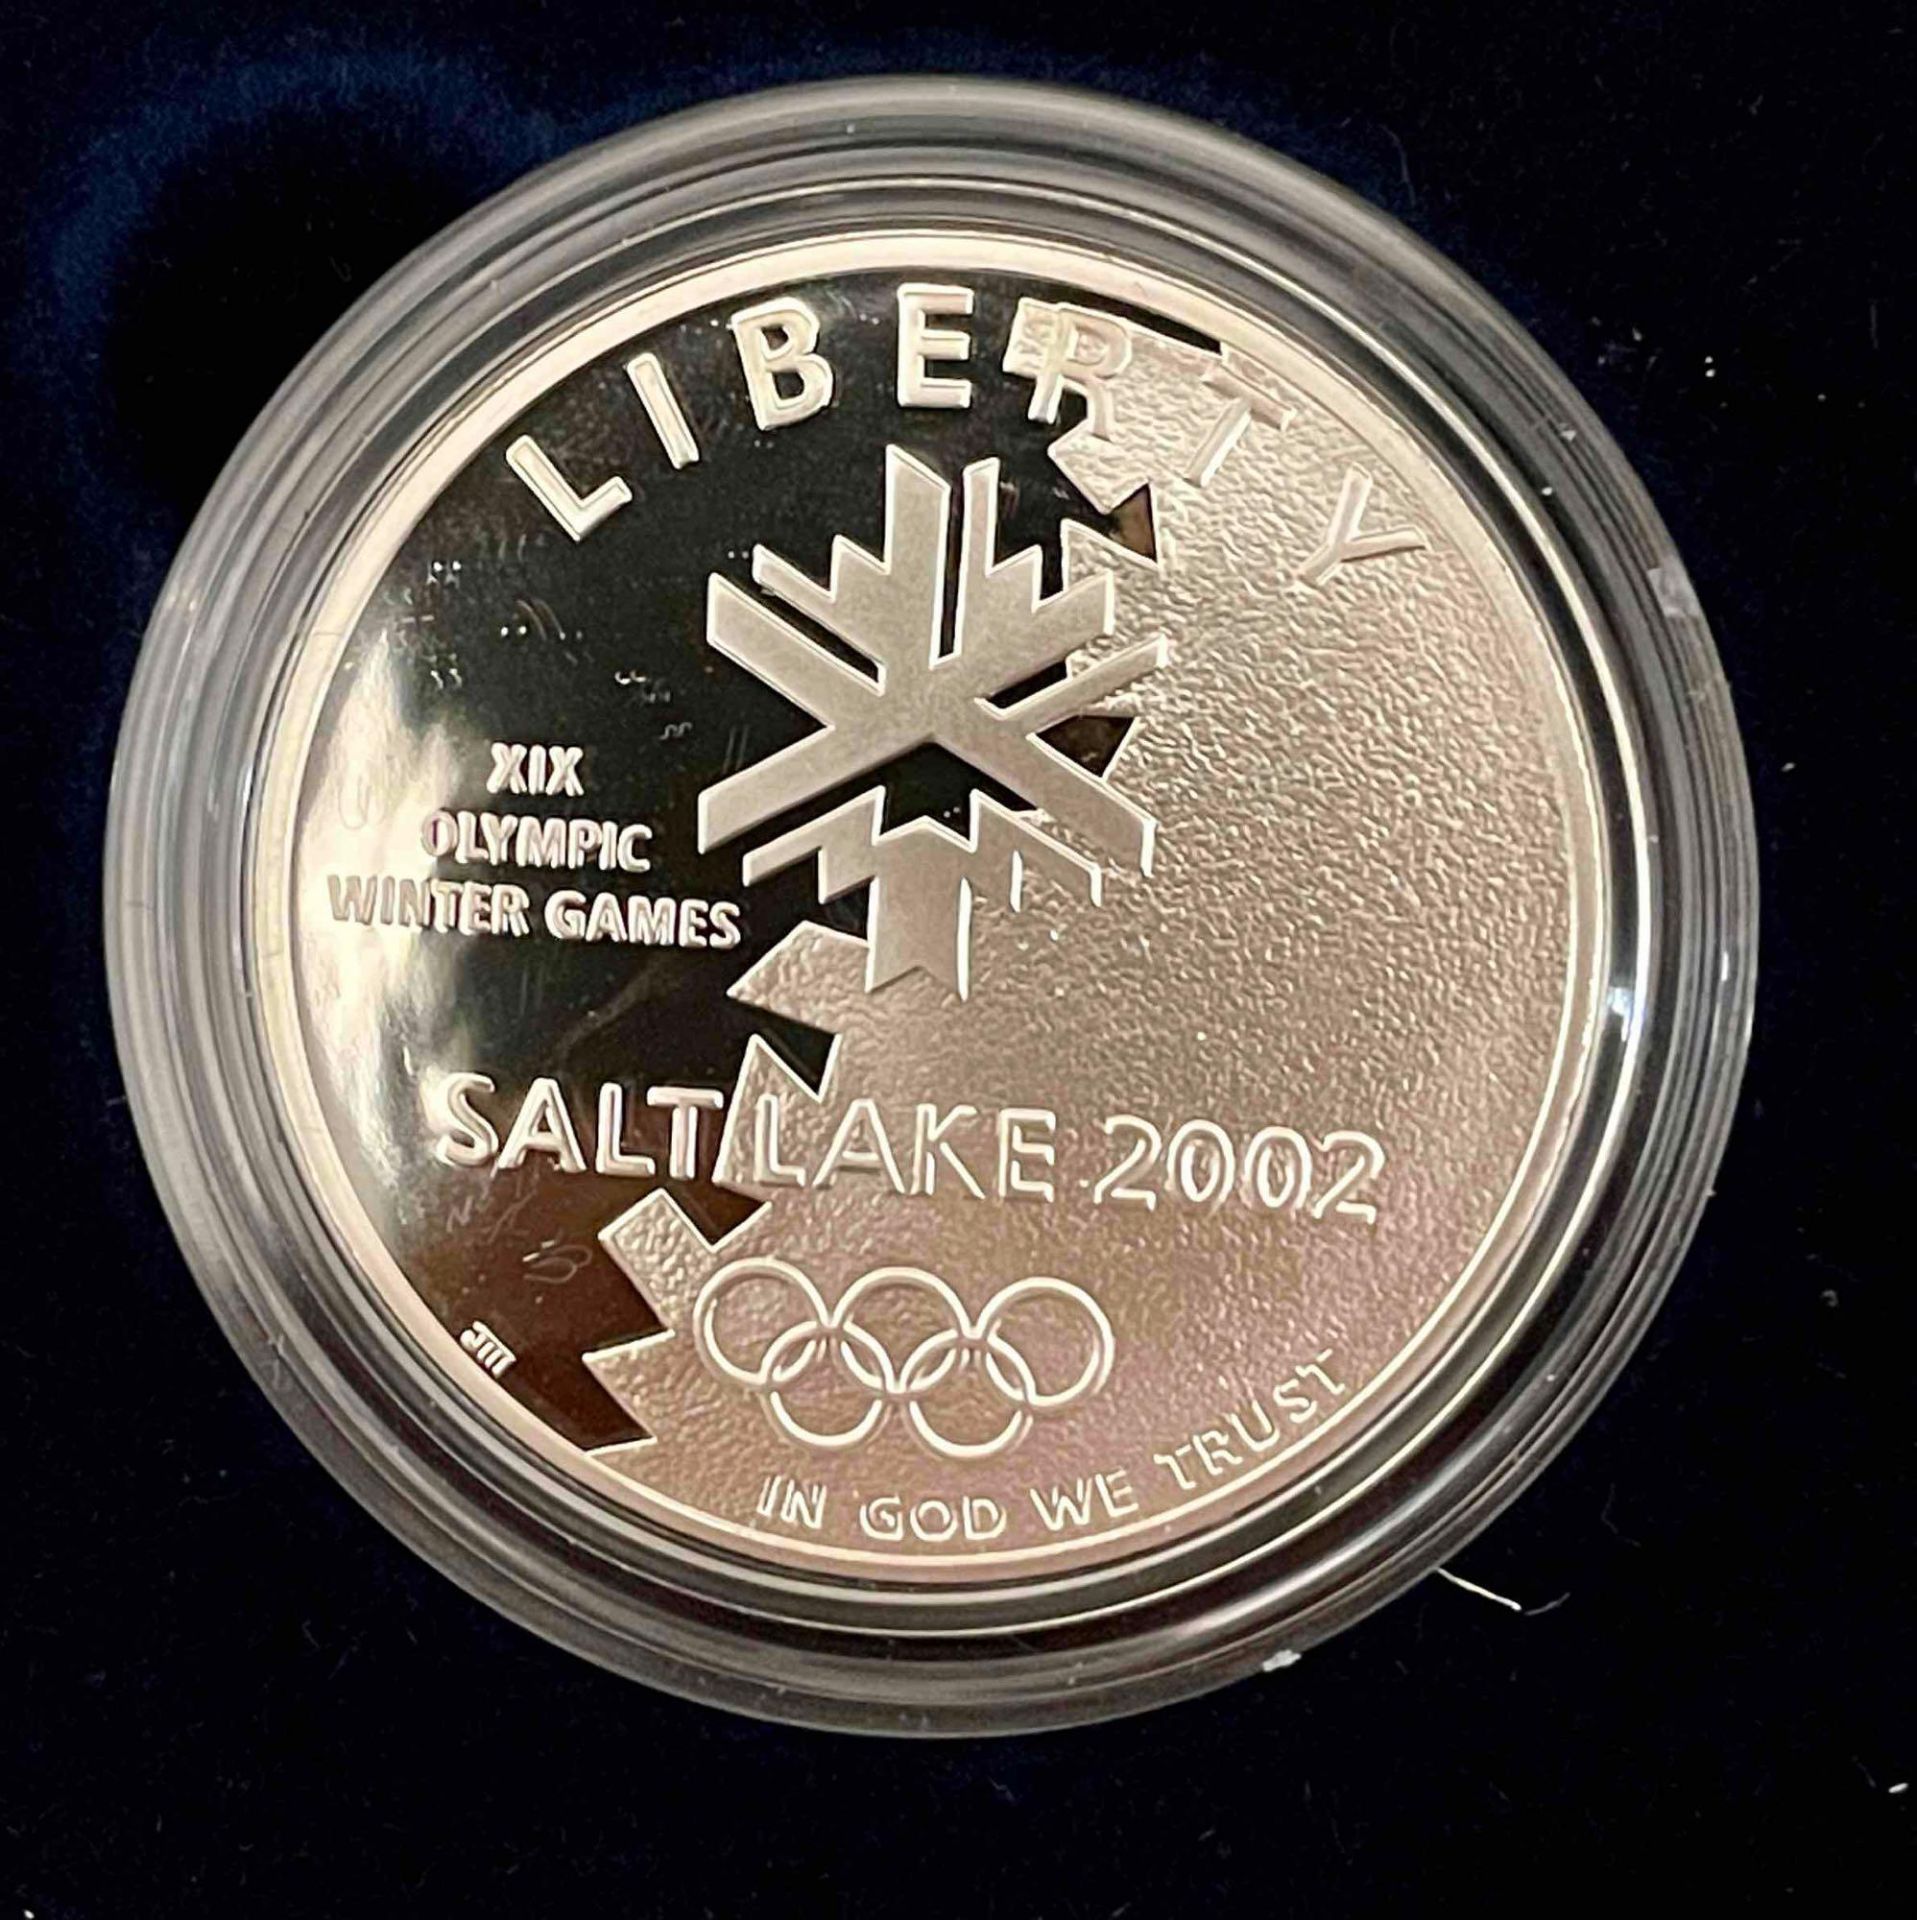 2002 W & P Salt Lake Olympic Winter Games Commemorative Two-Coin Set $5 Gold & $1 Silver Proofs - Image 3 of 11